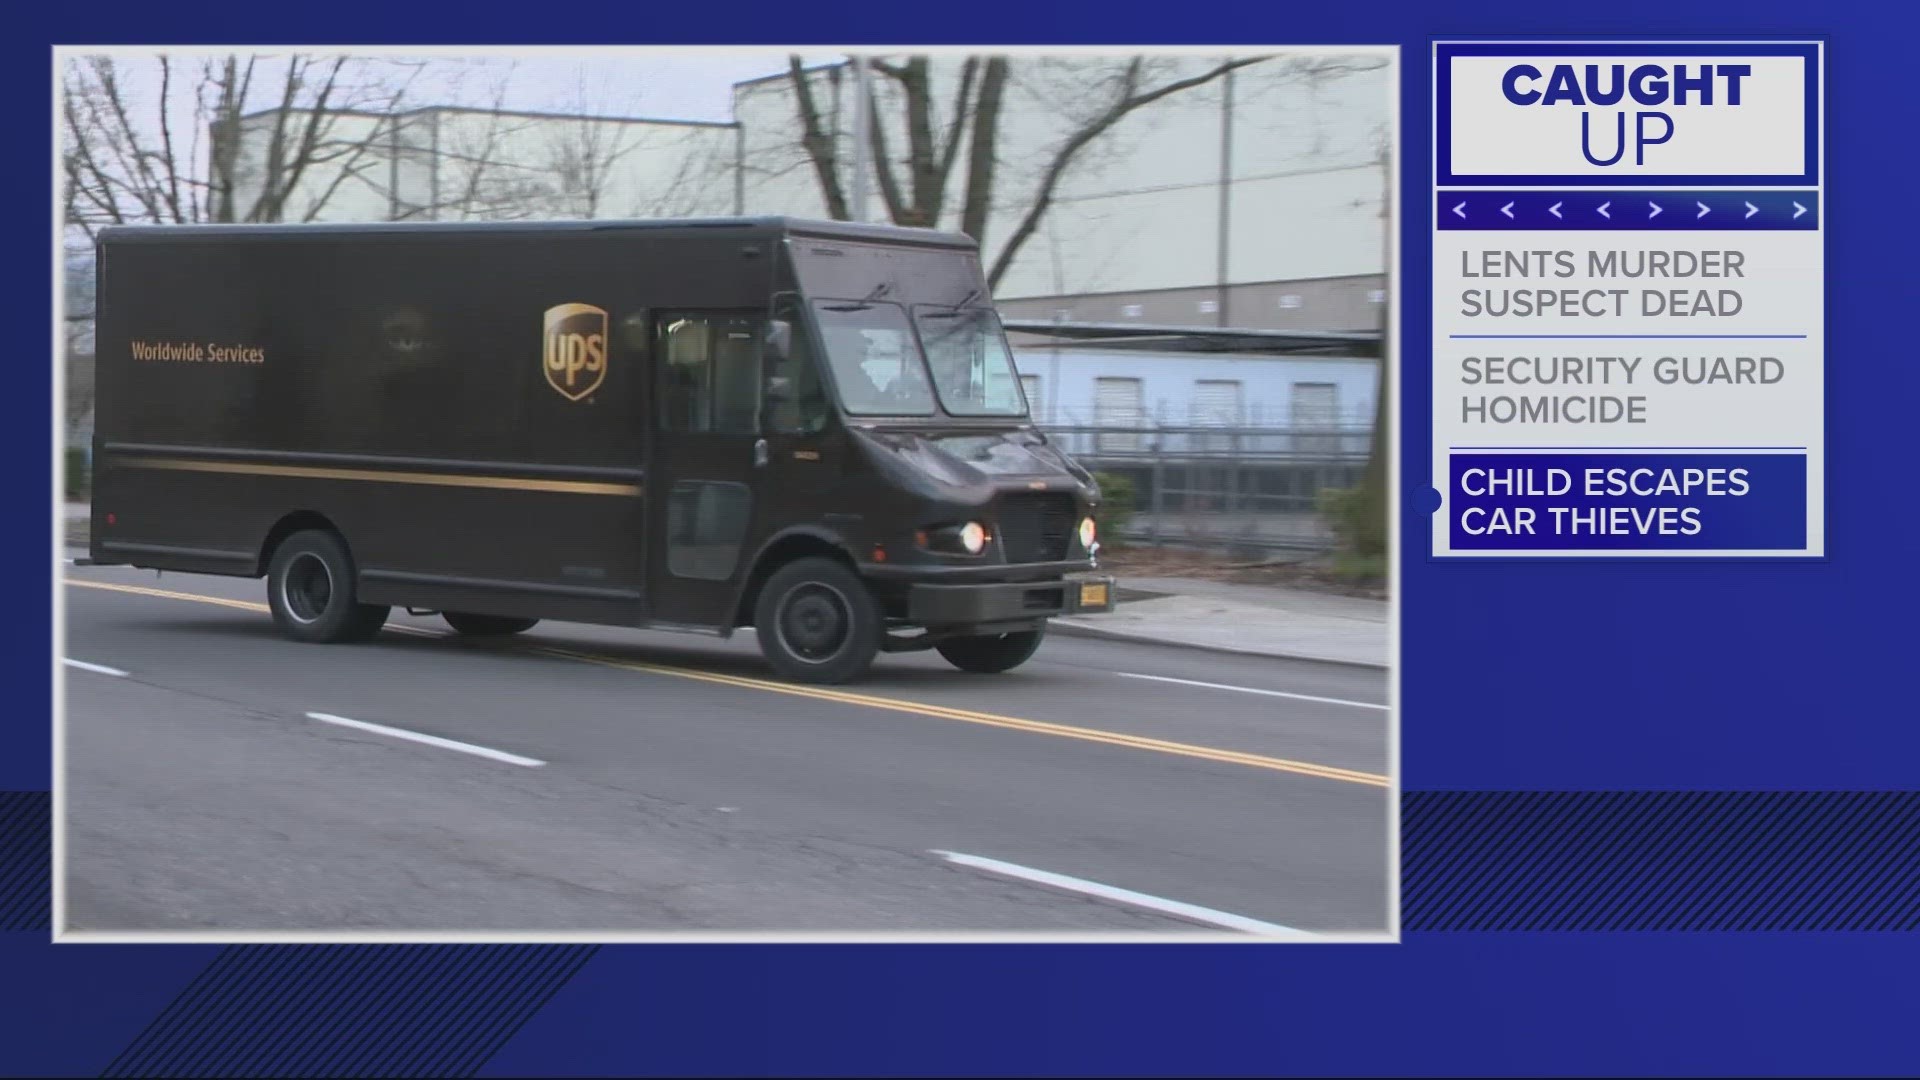 UPS is laying off 331 workers at a North Portland sorting facility, according to papers filed with the state.